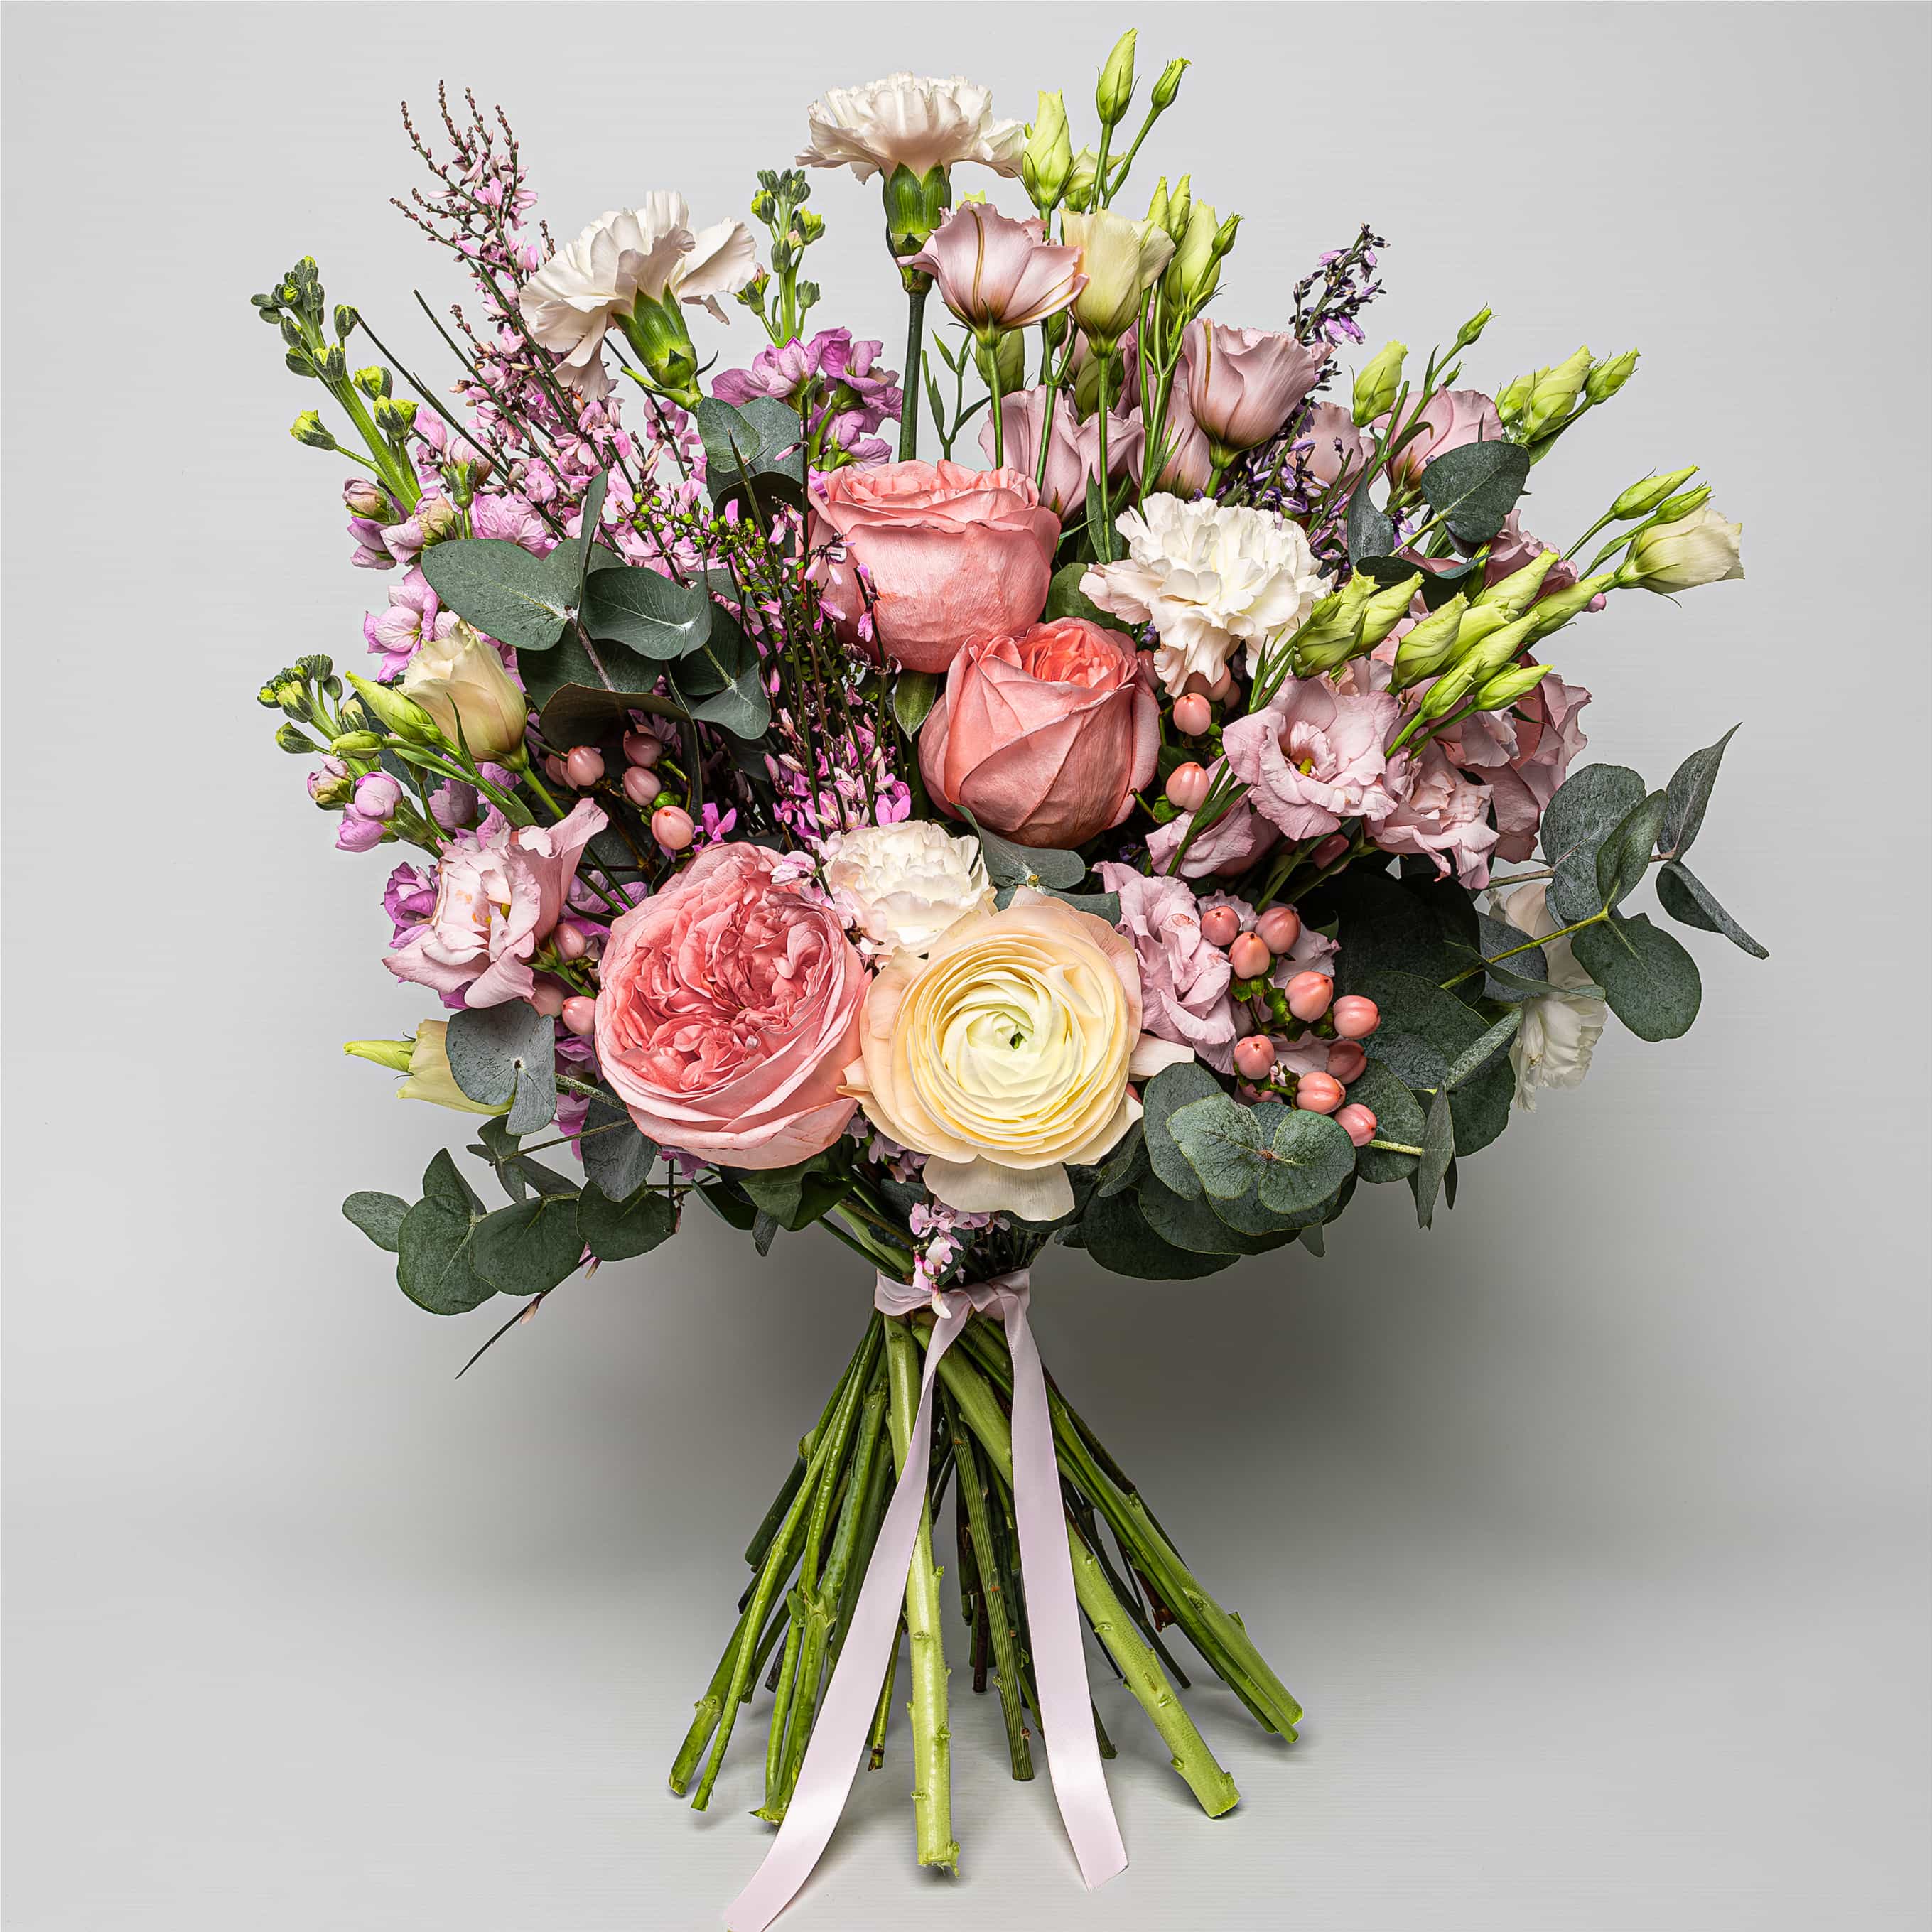 Spring Bloom Fresh Flower Bouquet is a luxury floral arrangement with several large, ruffled roses in varying shades of pink and peach, their opulent petals unfurling amidst the surrounding greenery. A delicate collection of blooms in soft pastel shades, suggesting sophistication and grace. It includes blushing pink roses, creamy white lisianthus, and hints of lavender and pale green, creating a harmonious visual symphony.